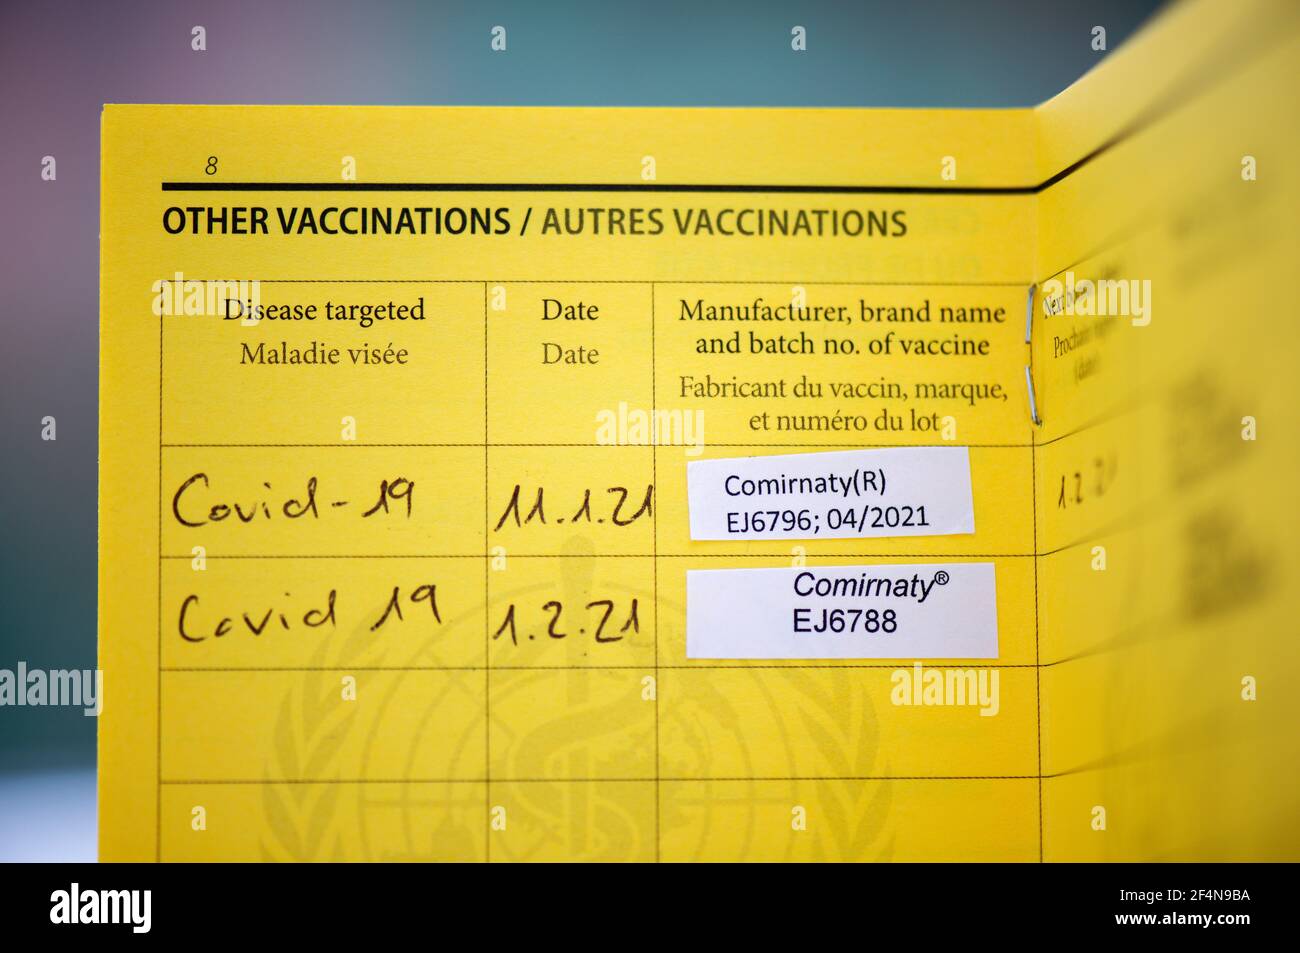 2 Covid vaccinations listed in a vaccination card Stock Photo